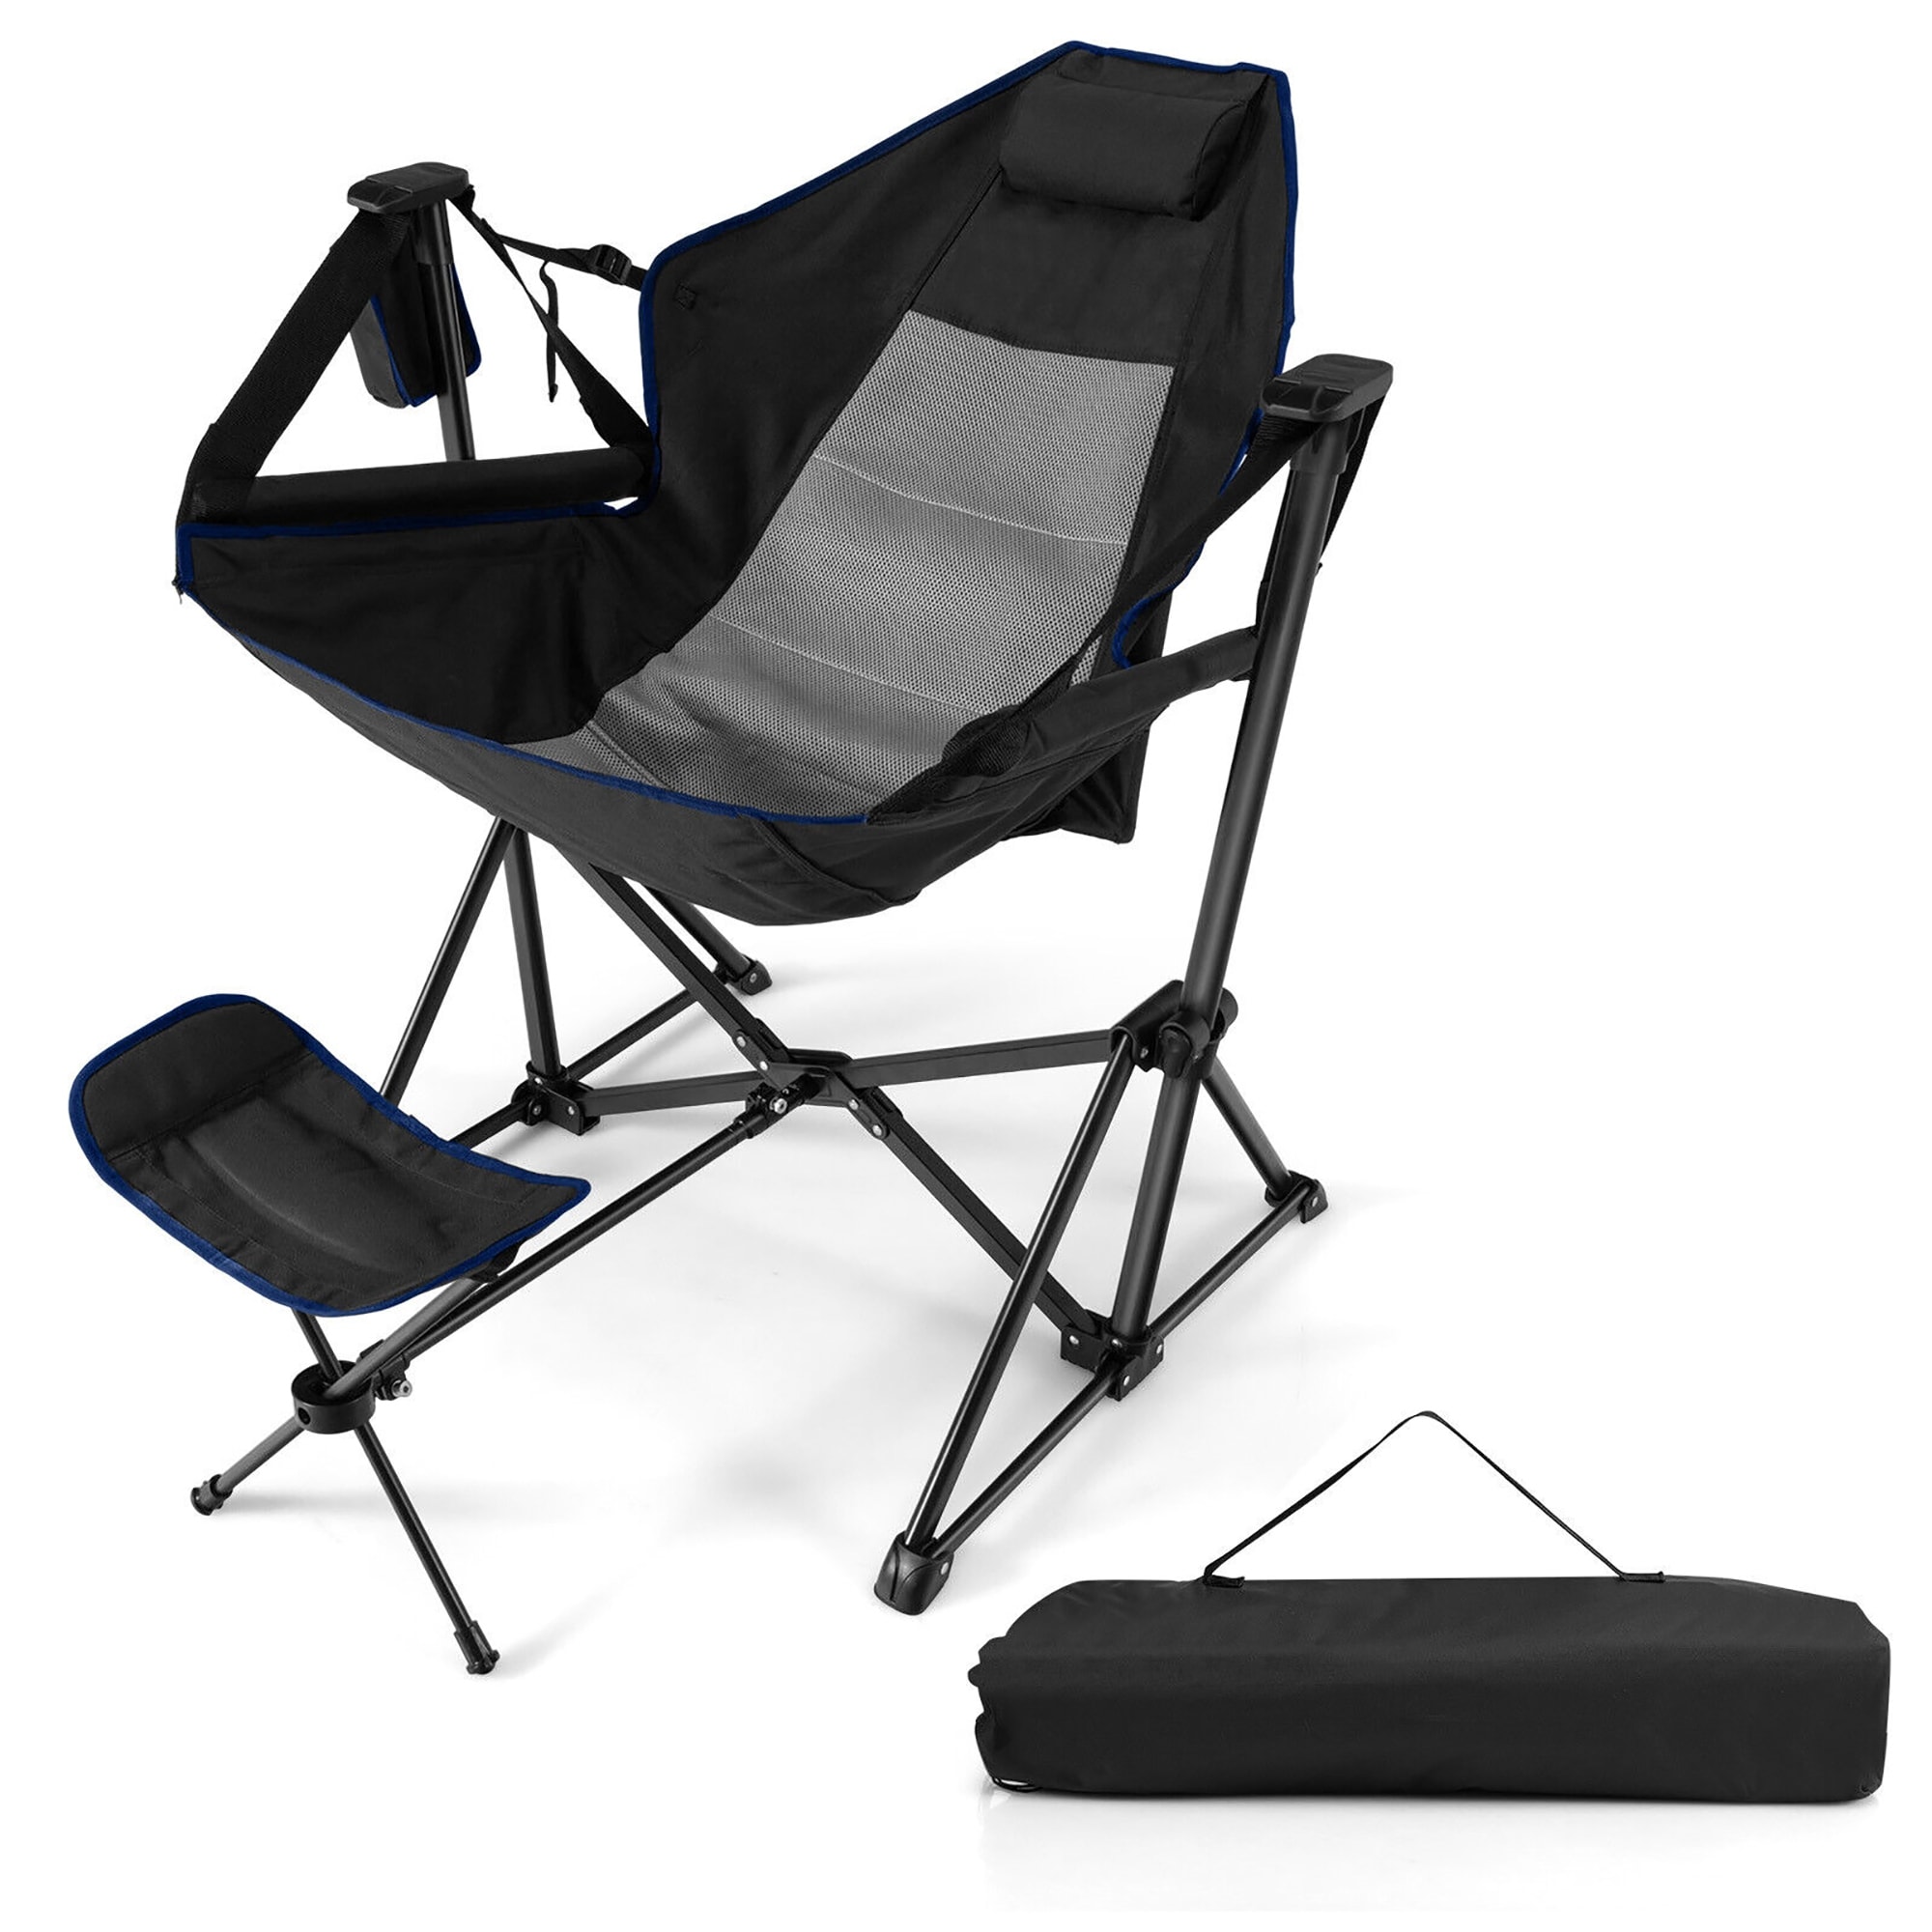 https://ak1.ostkcdn.com/images/products/is/images/direct/d99568ae9c5af80edd64eeb1825206601053b090/Gymax-Hammock-Camping-Chair-w--Retractable-Footrest-%26-Carrying-Bag-for.jpg